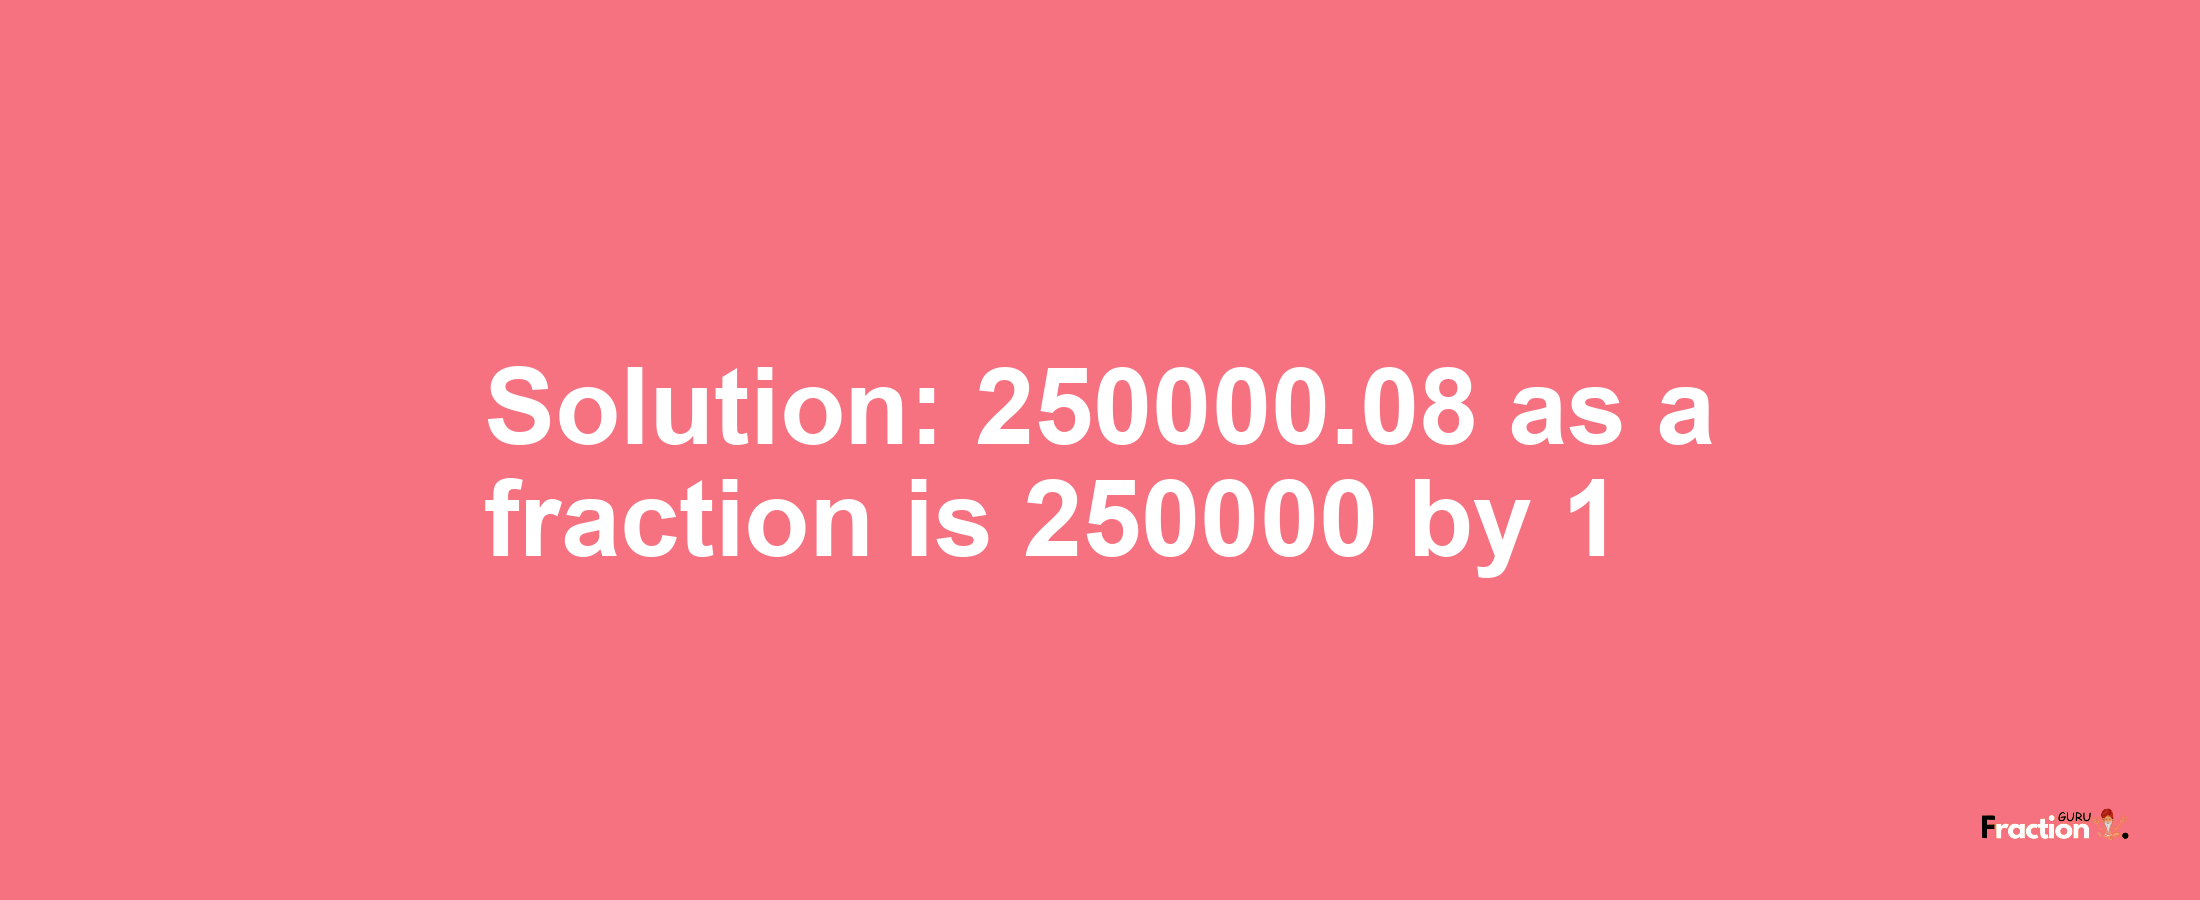 Solution:250000.08 as a fraction is 250000/1